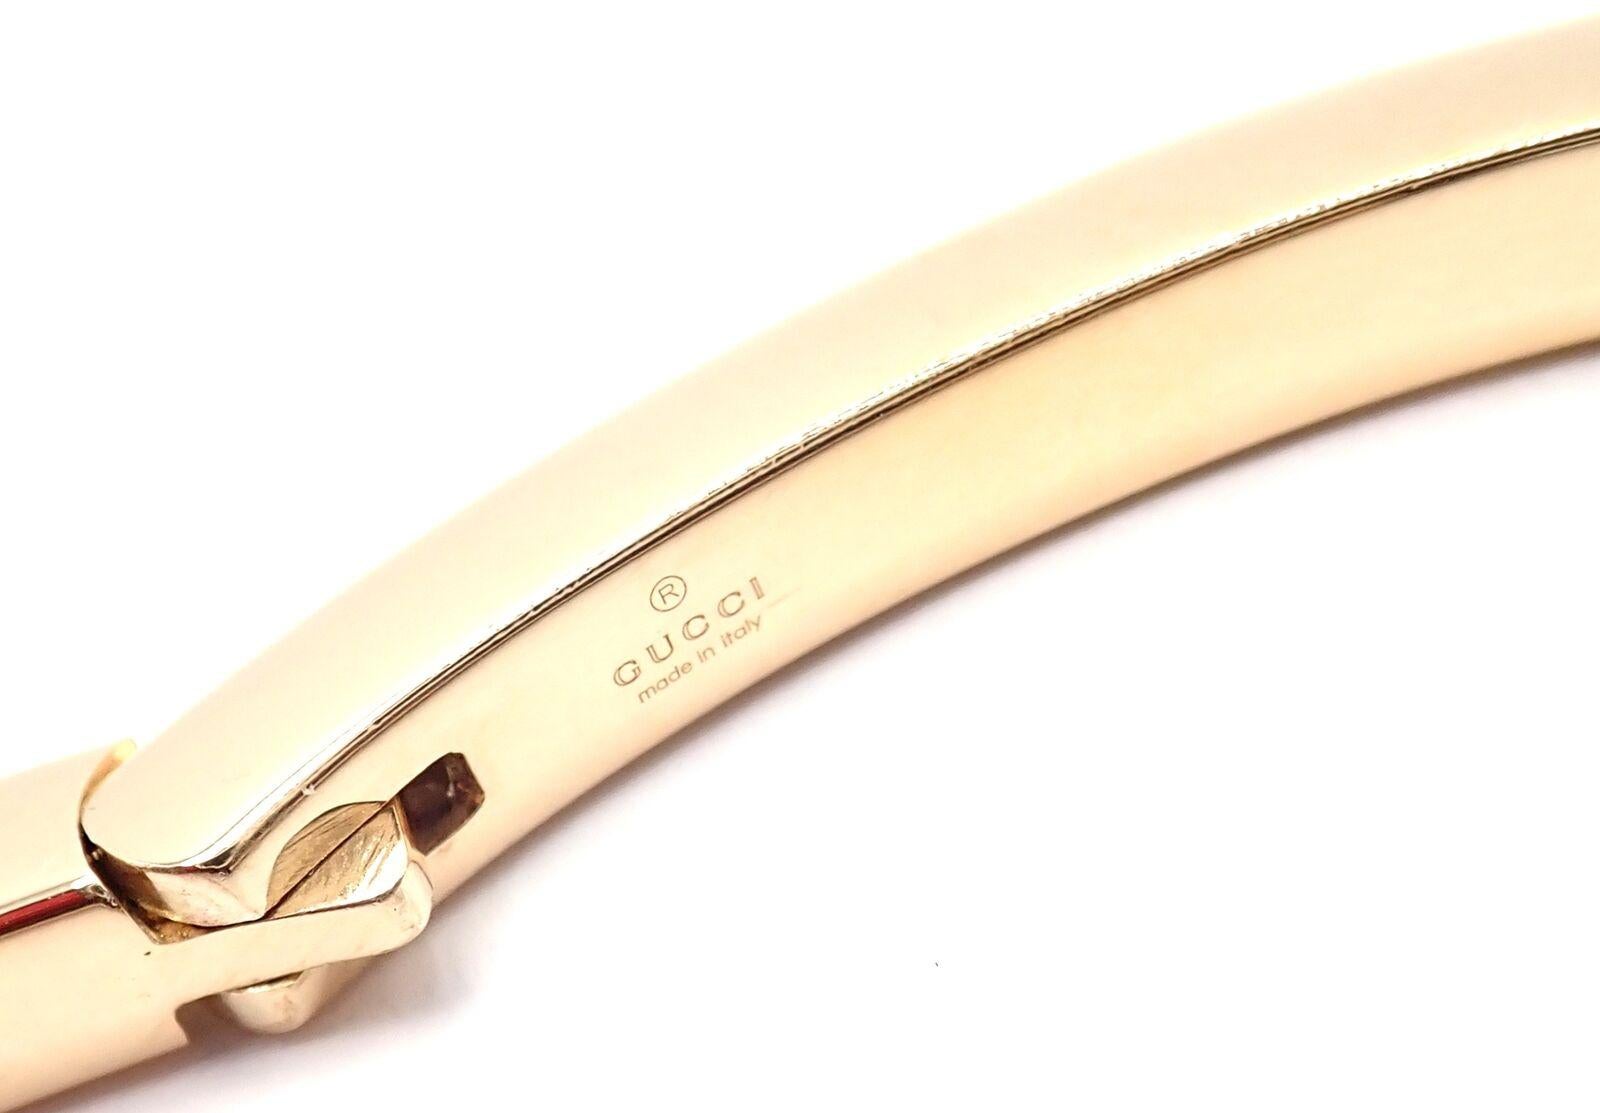 Gucci Chiodo Nail Yellow Gold Bangle Bracelet In New Condition For Sale In Holland, PA